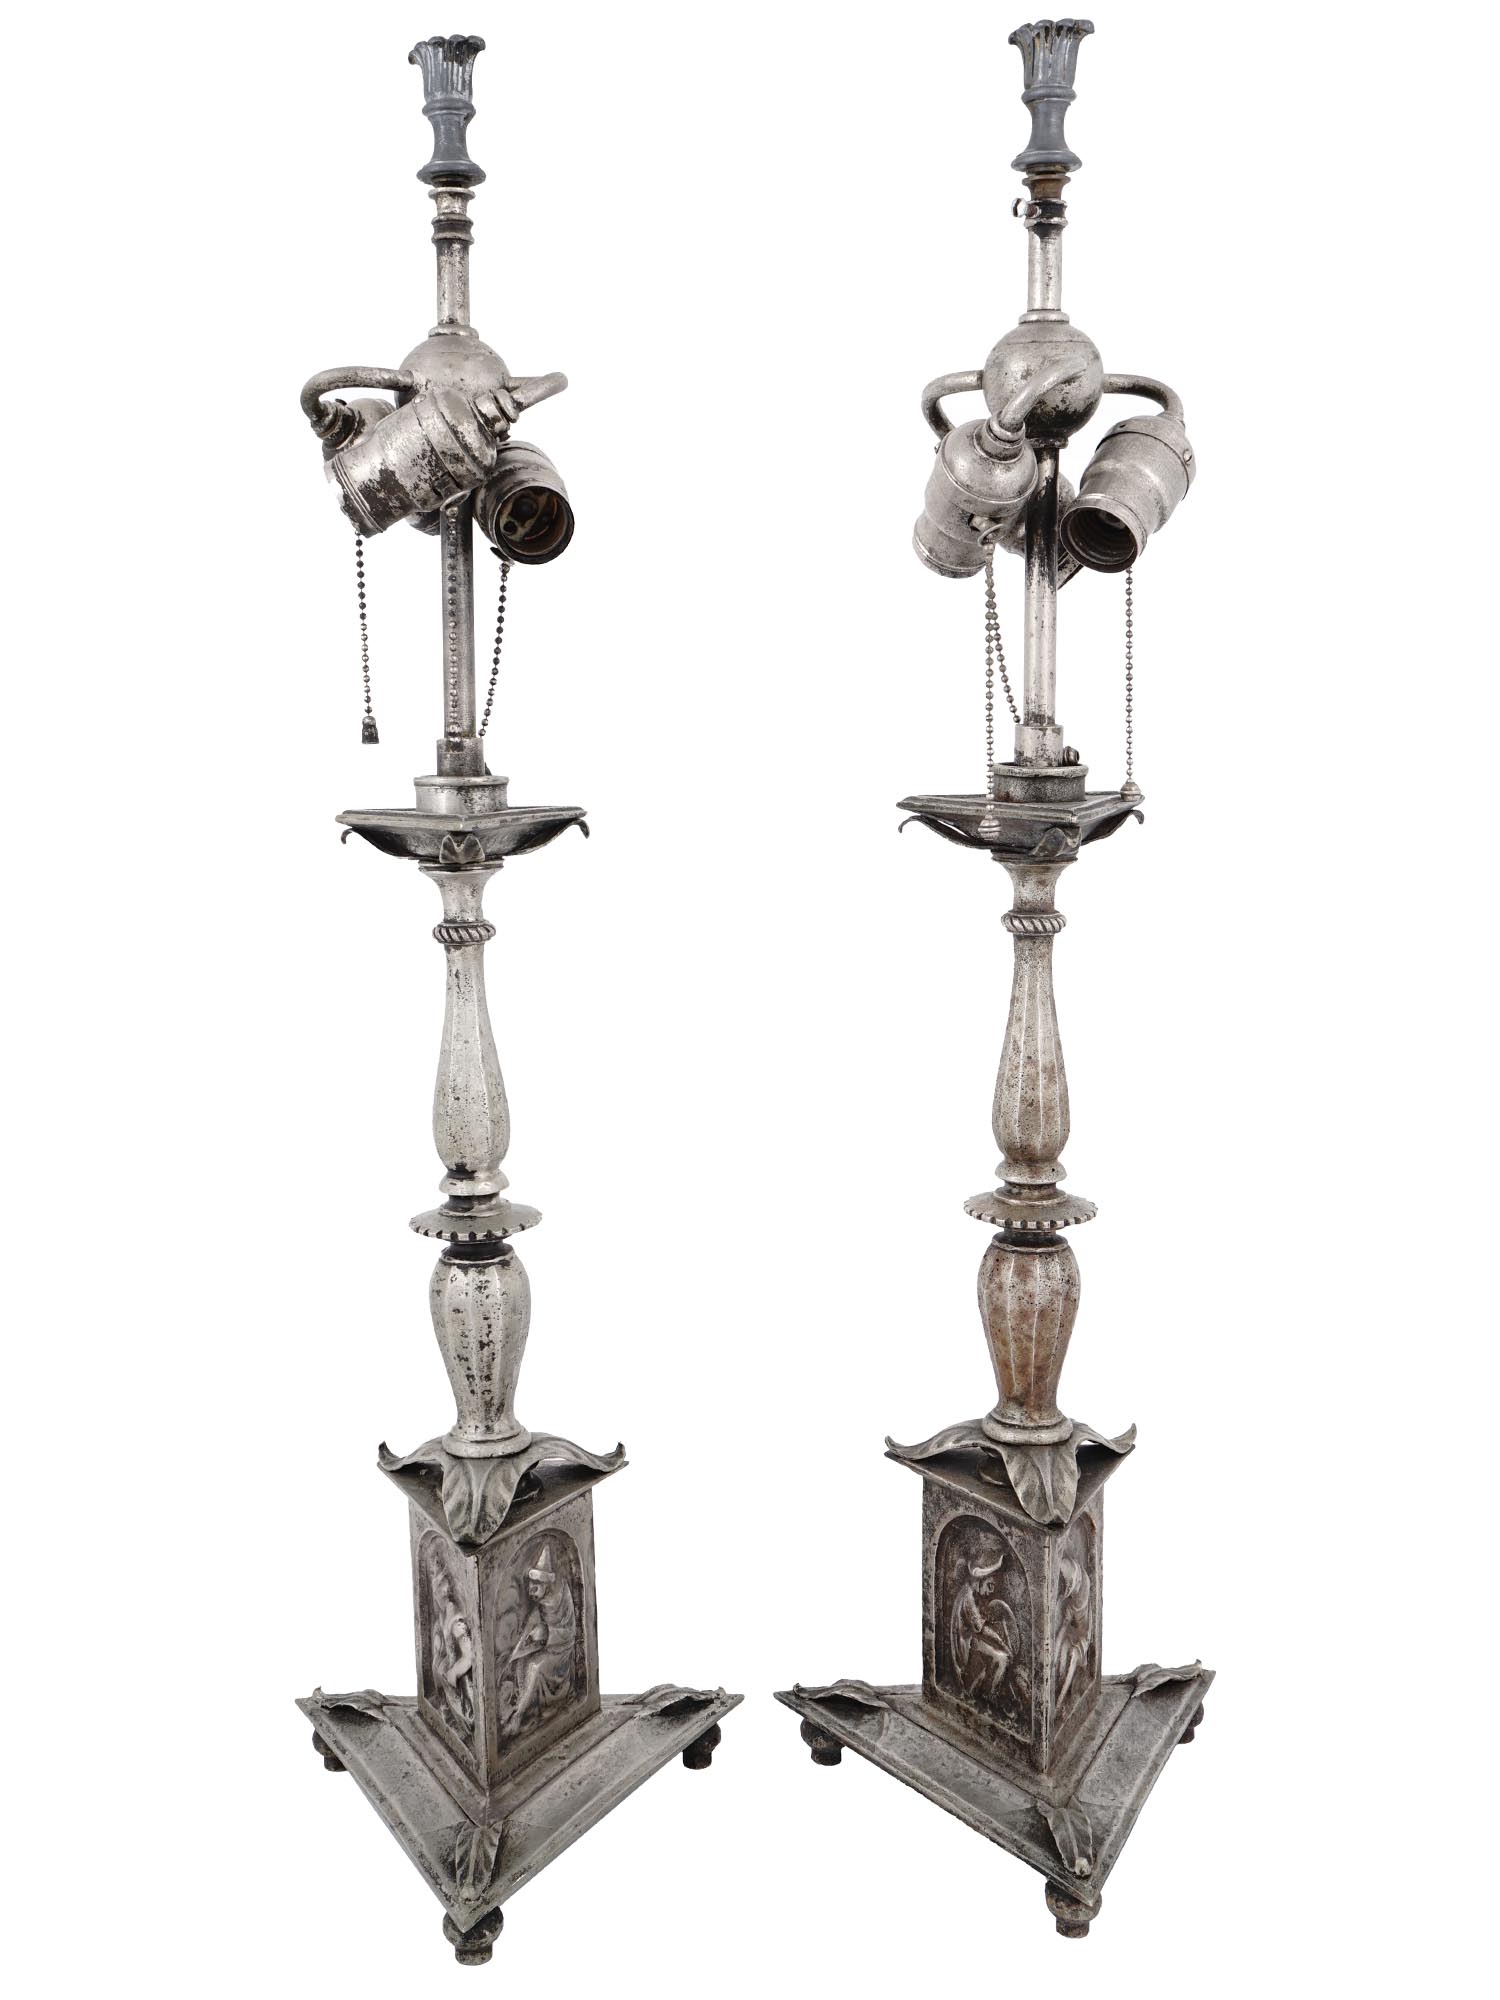 ANTIQUE GOTHIC SILVER PLATED LAMPS BY EF CALDWELL PIC-2